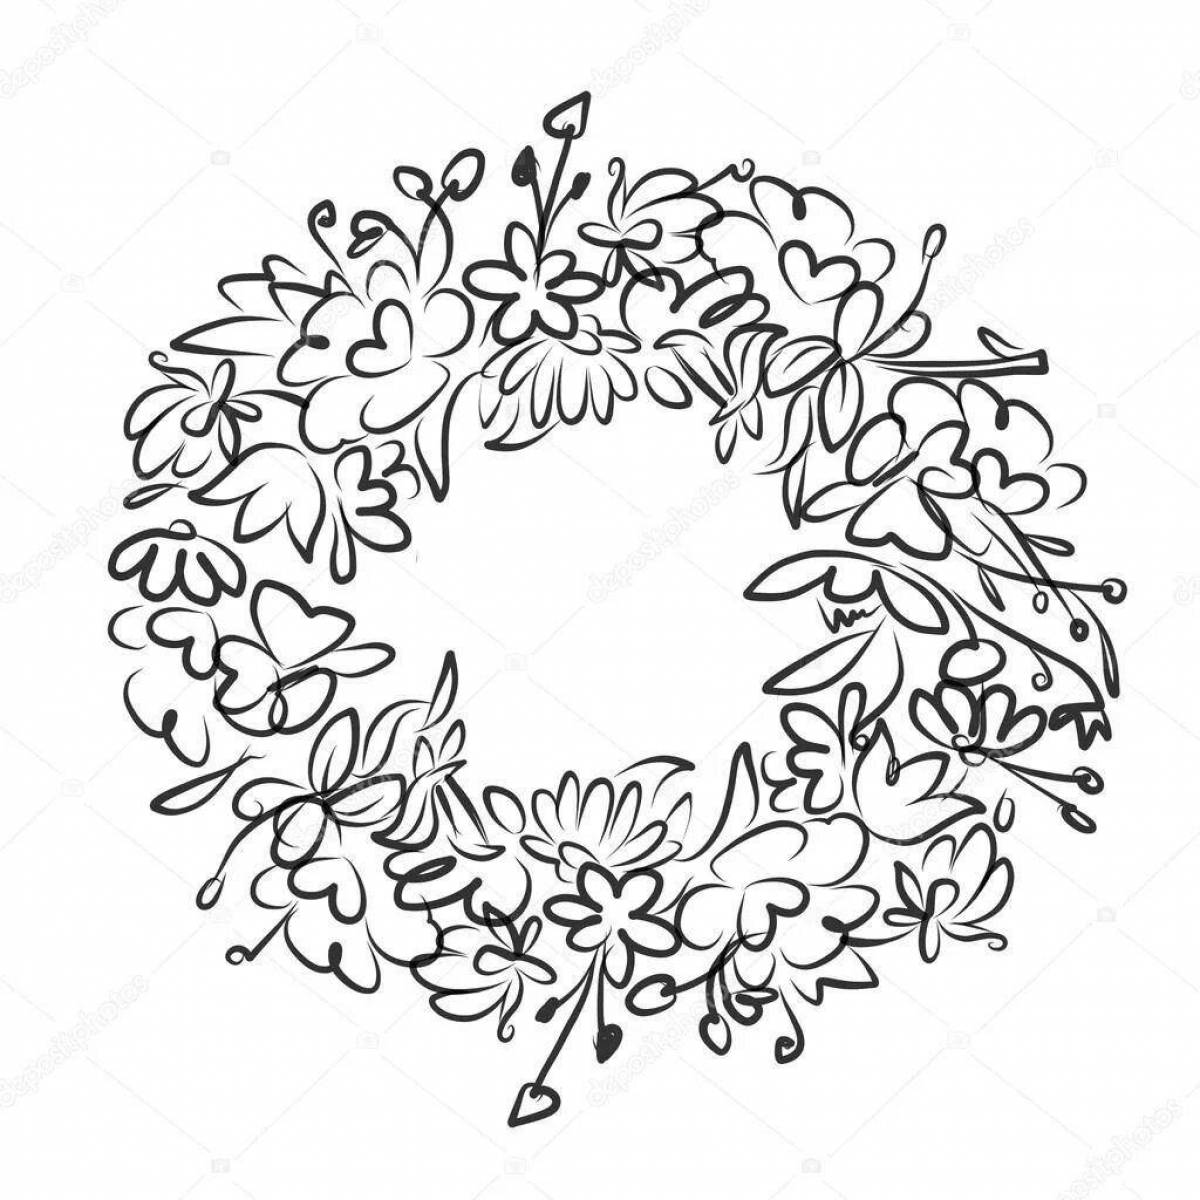 Coloring page cheerful wreath of flowers